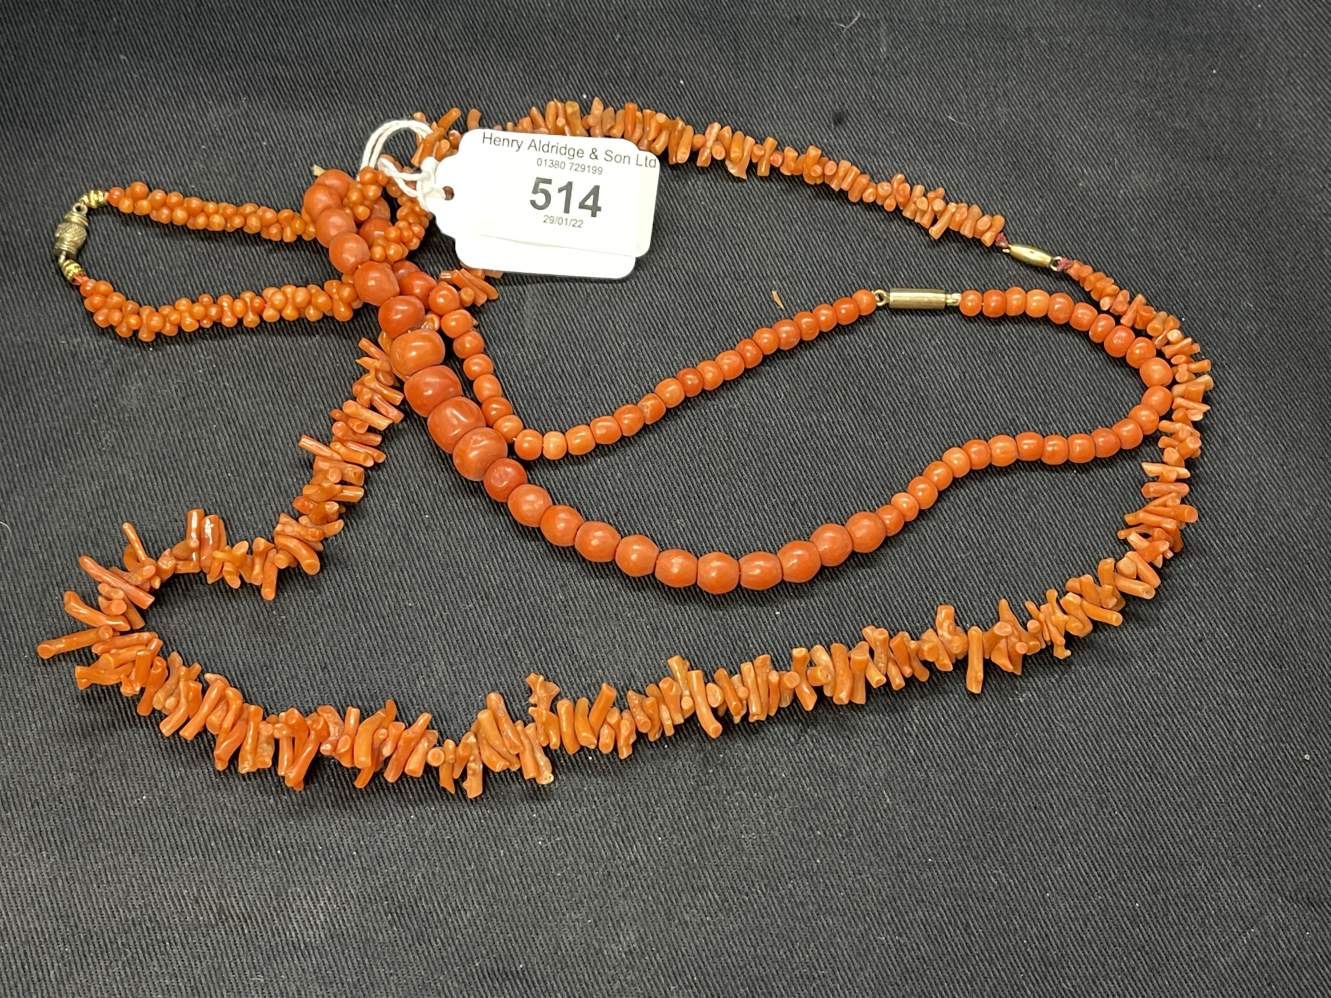 Jewellery: Necklets two coral, one bead and one branch style, plus one bracelet.